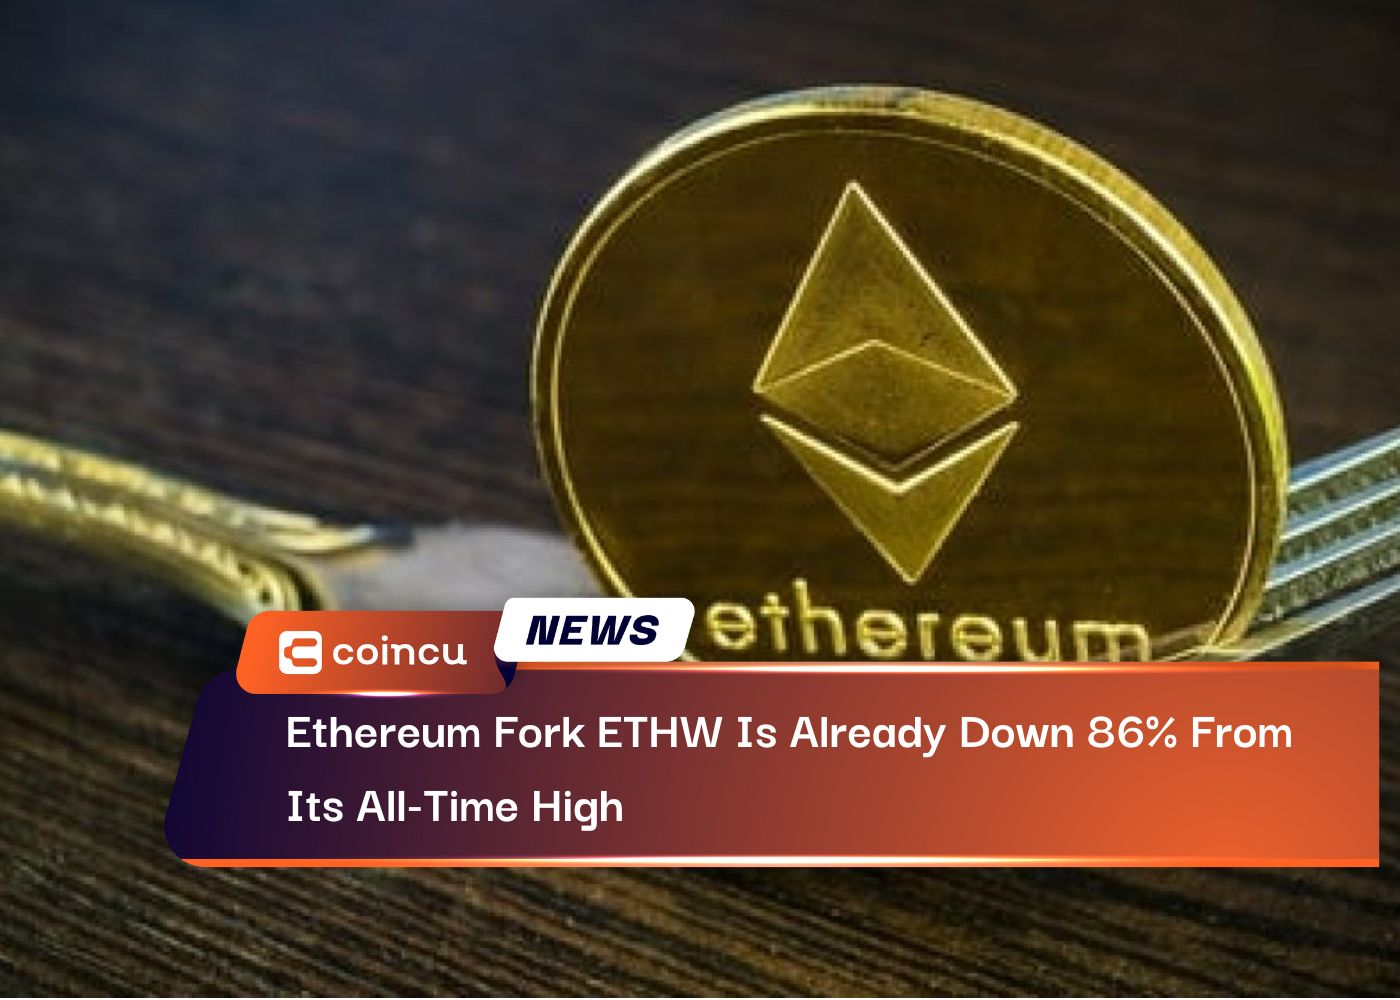 Ethereum Fork ETHW Is Already Down 86% From Its All-Time High